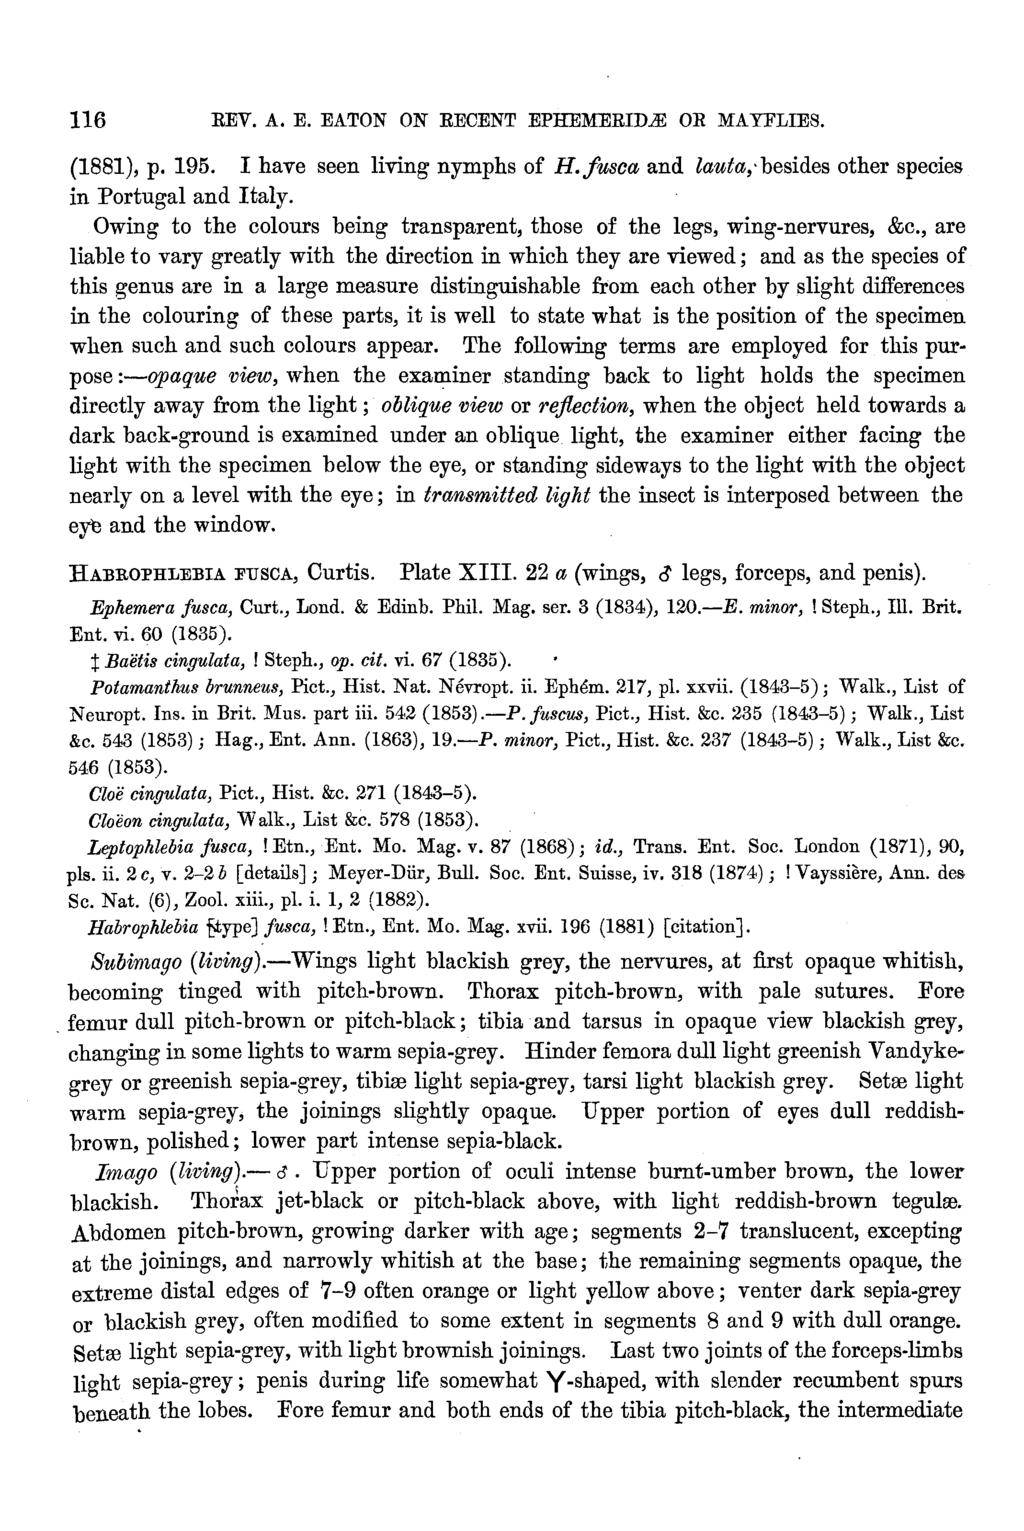 116 REV. A. E. EATON ON RECENT EPHEMERID.Ji: OR MAYFLIES. (1881), p. 195. I have seen living nymphs of H.fusaa and lauta;besides other species in Portugal and Italy.